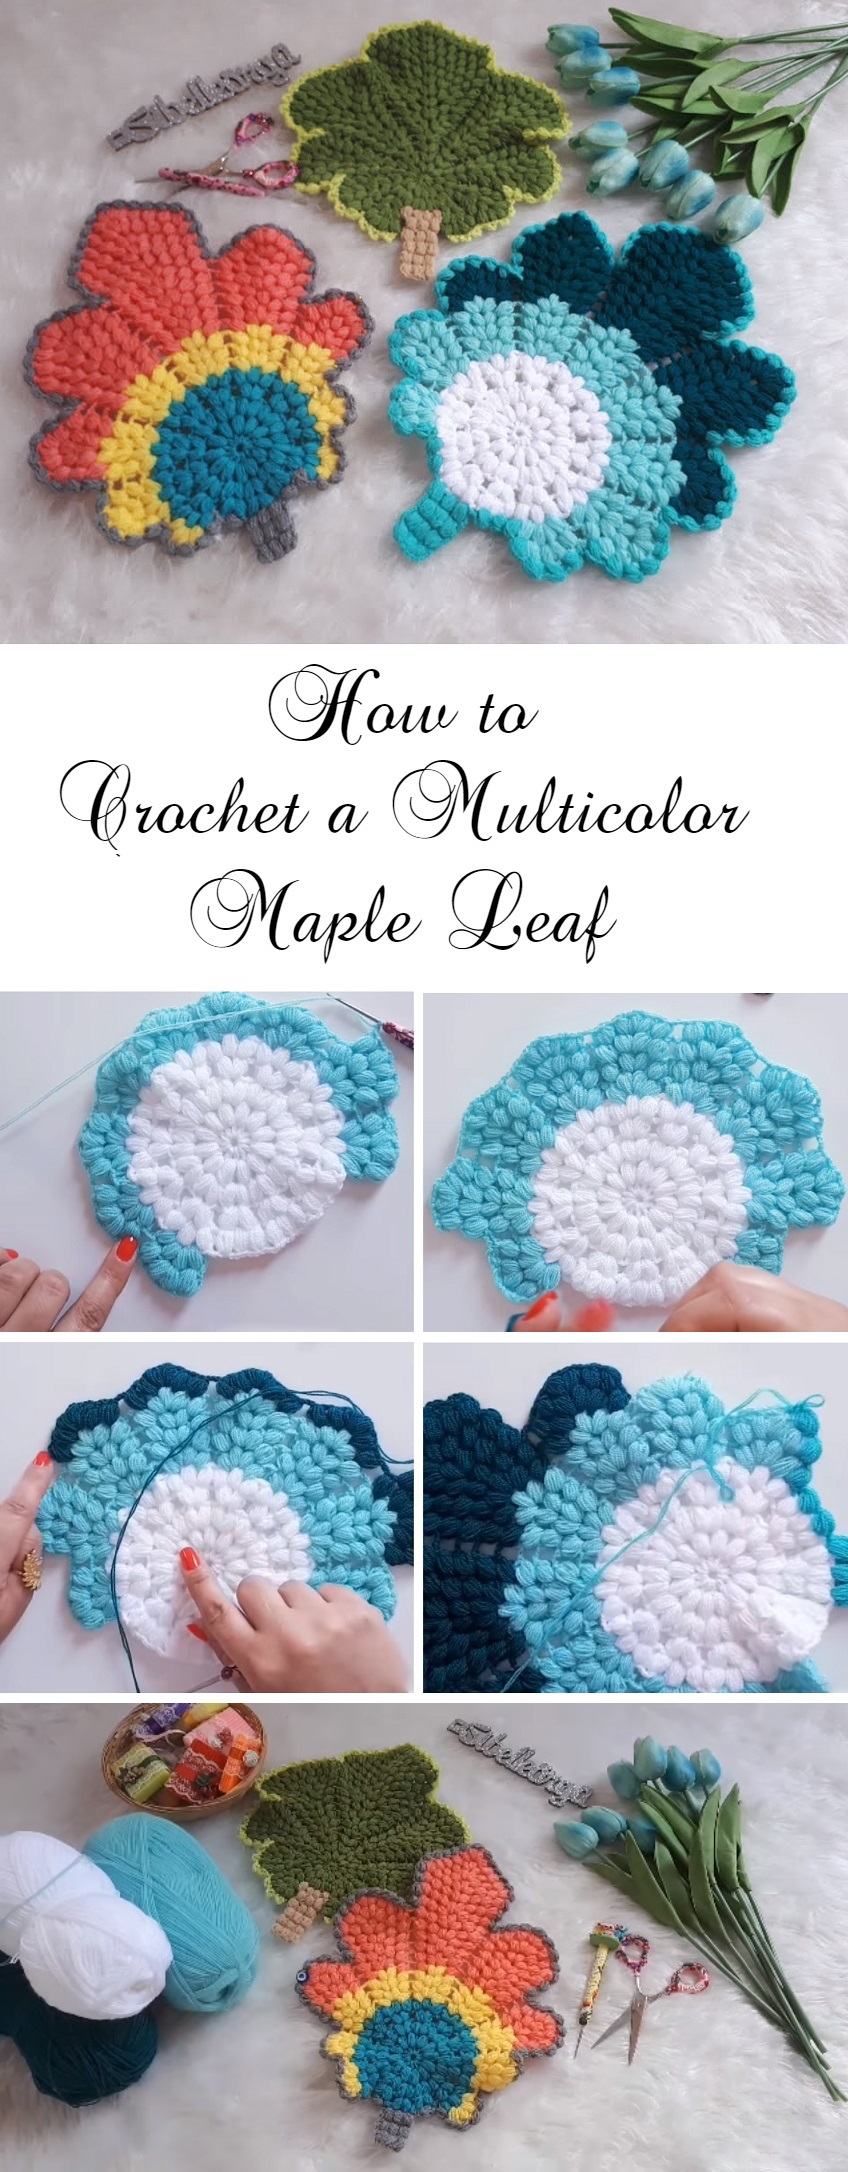 How to Crochet Multicolor Maple Leaf